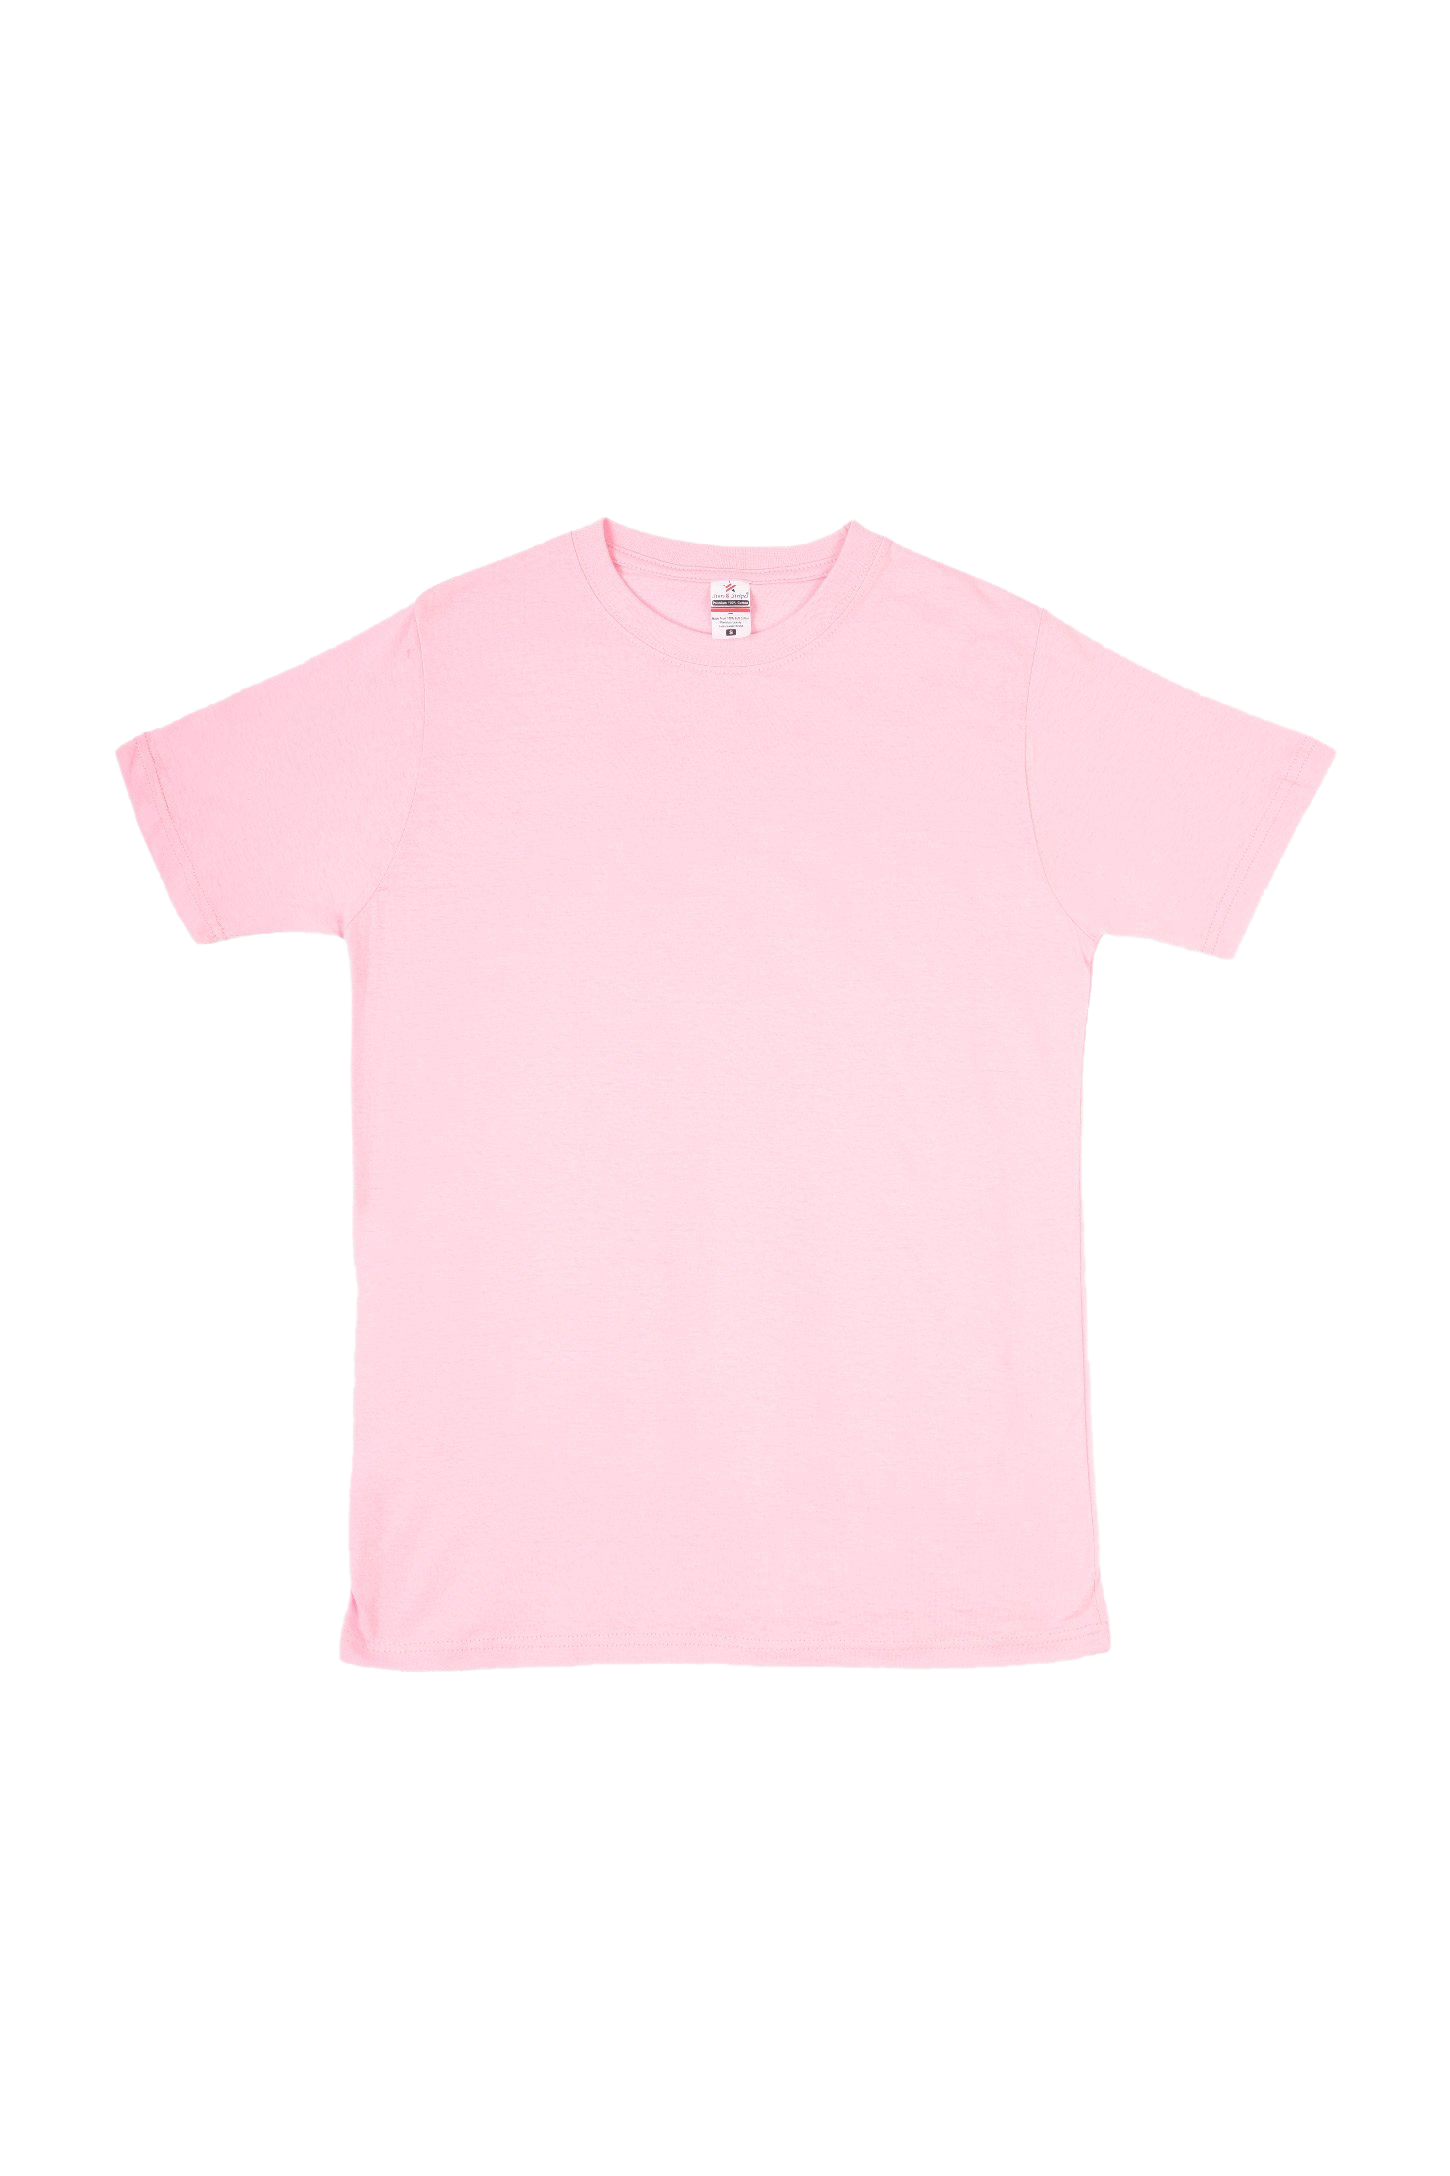 Download Pink T-Shirt PNG Transparent Images, Pictures, Photos ...